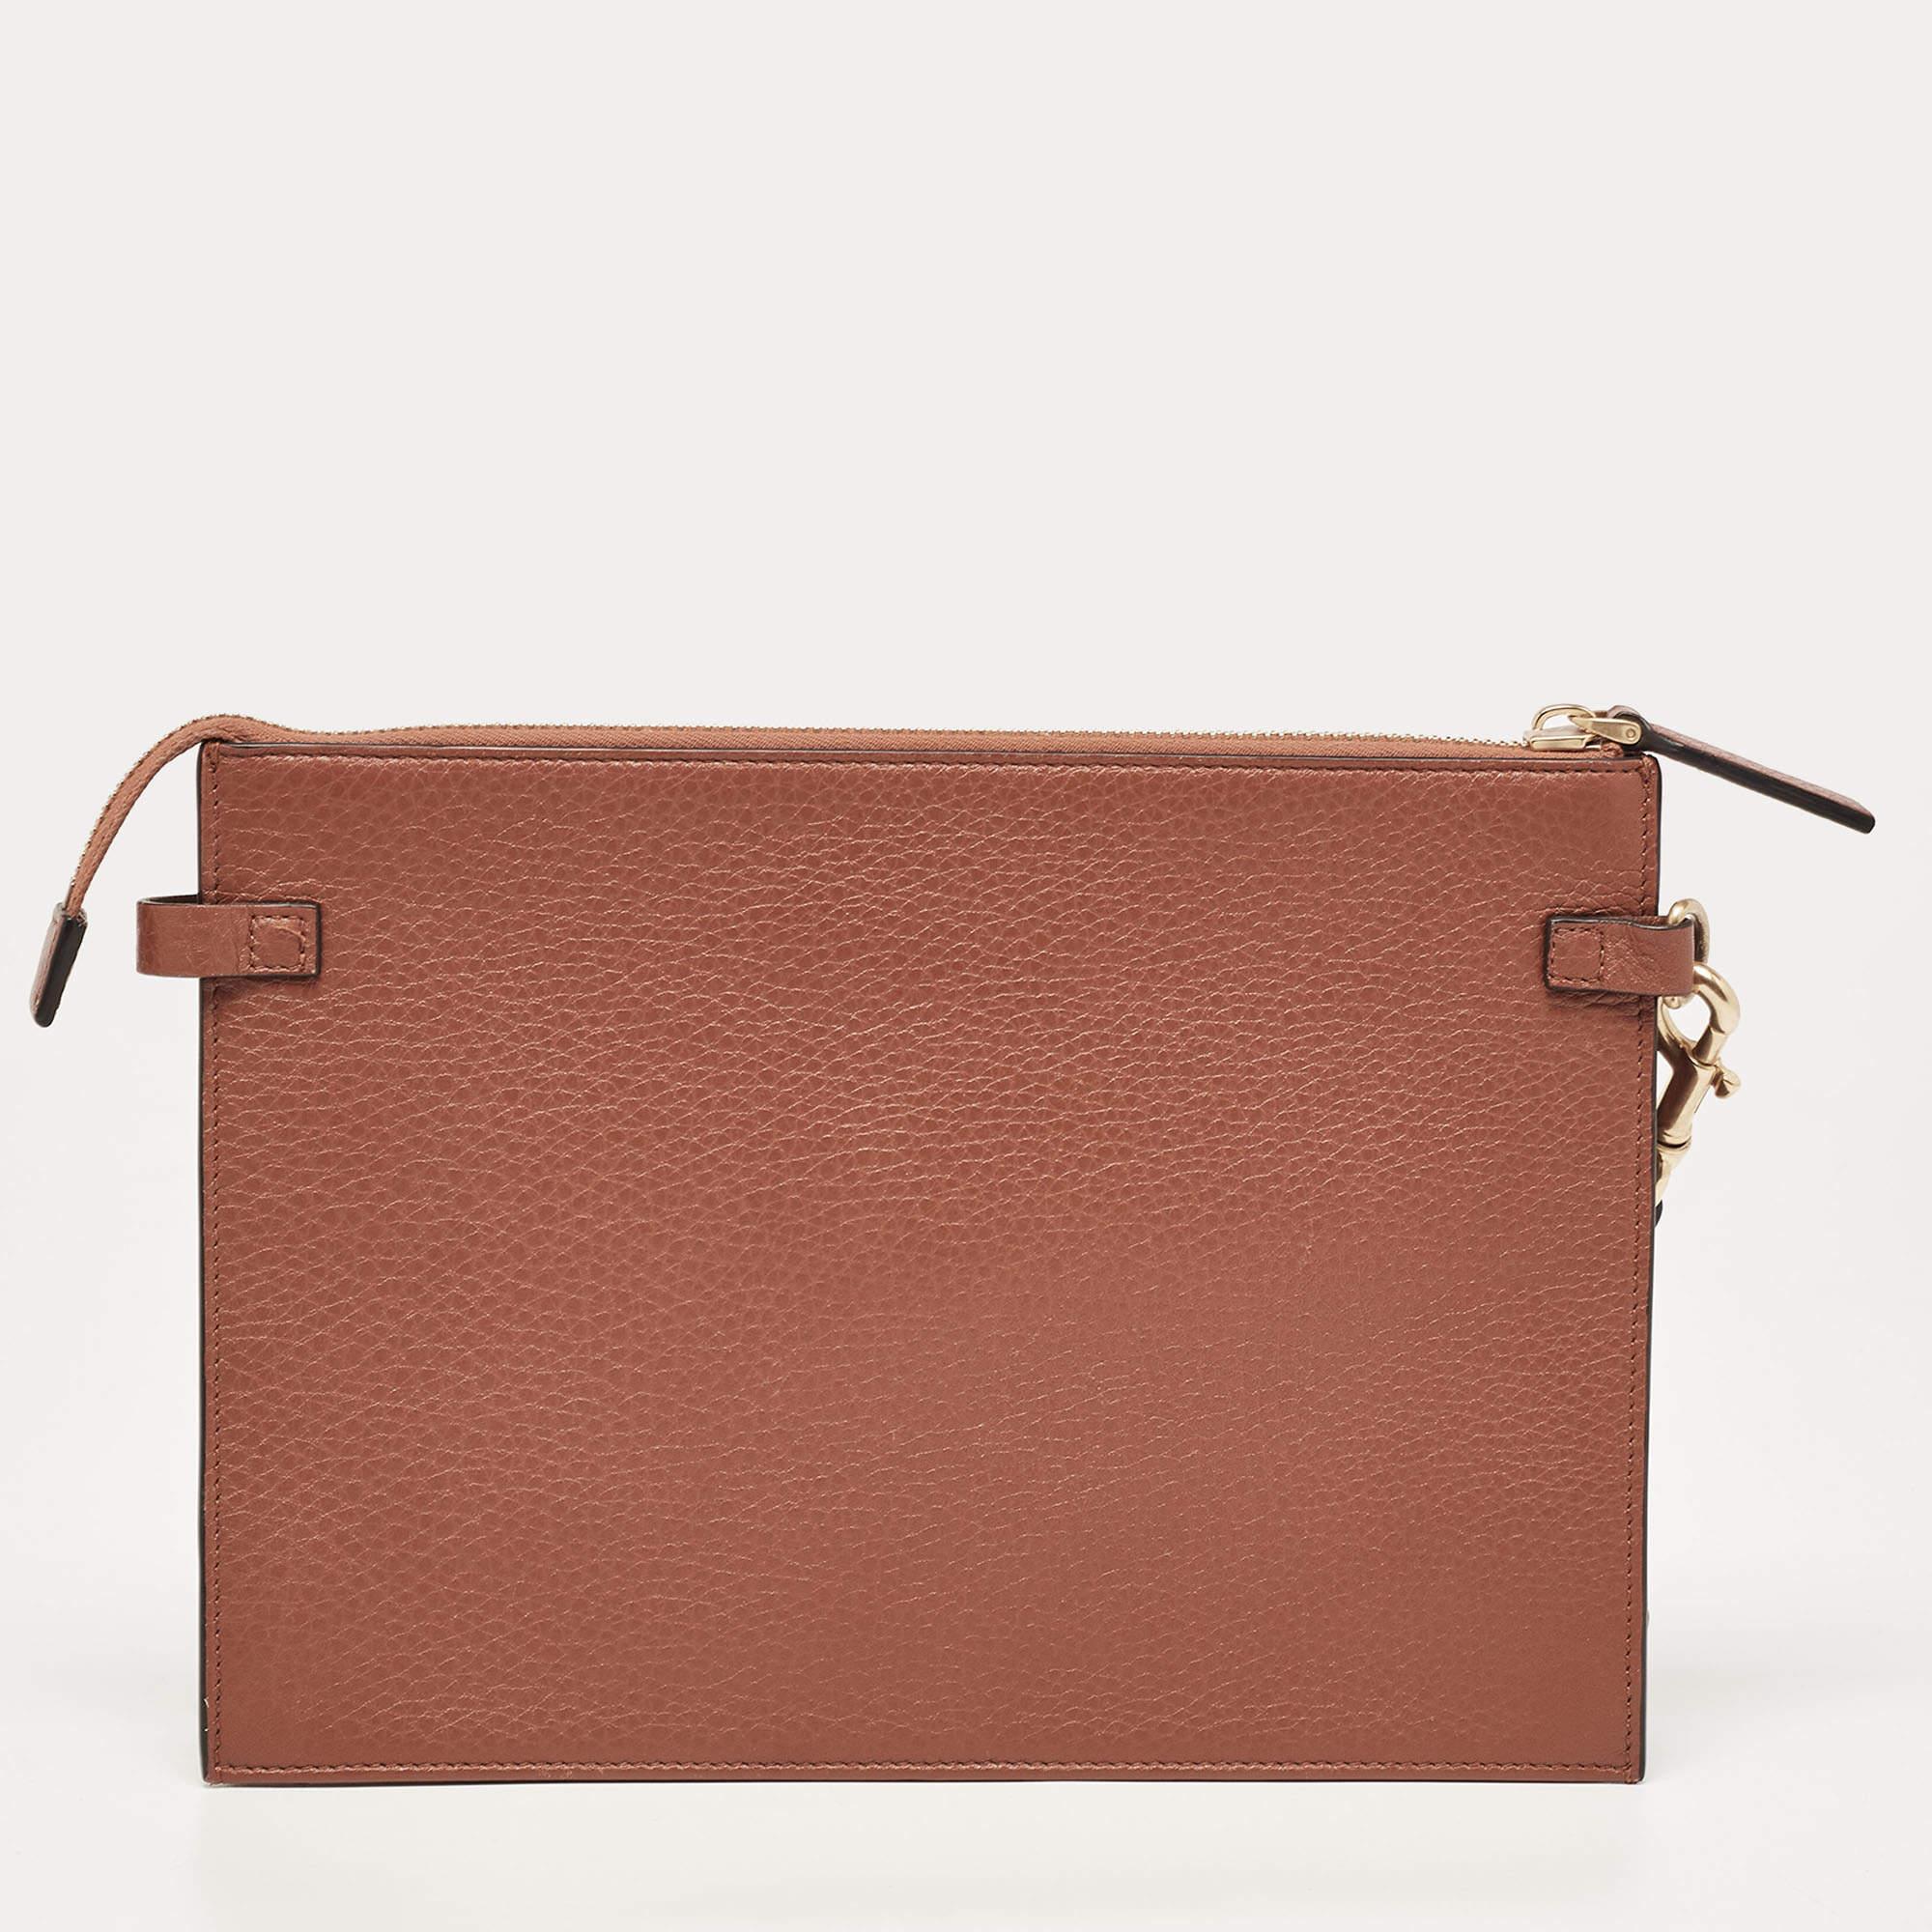 This Valentino clutch is just the right accessory to compliment your chic ensemble. It comes crafted in quality material featuring a well-sized interior that can comfortably hold all your little essentials.

Includes: Original Dustbag

